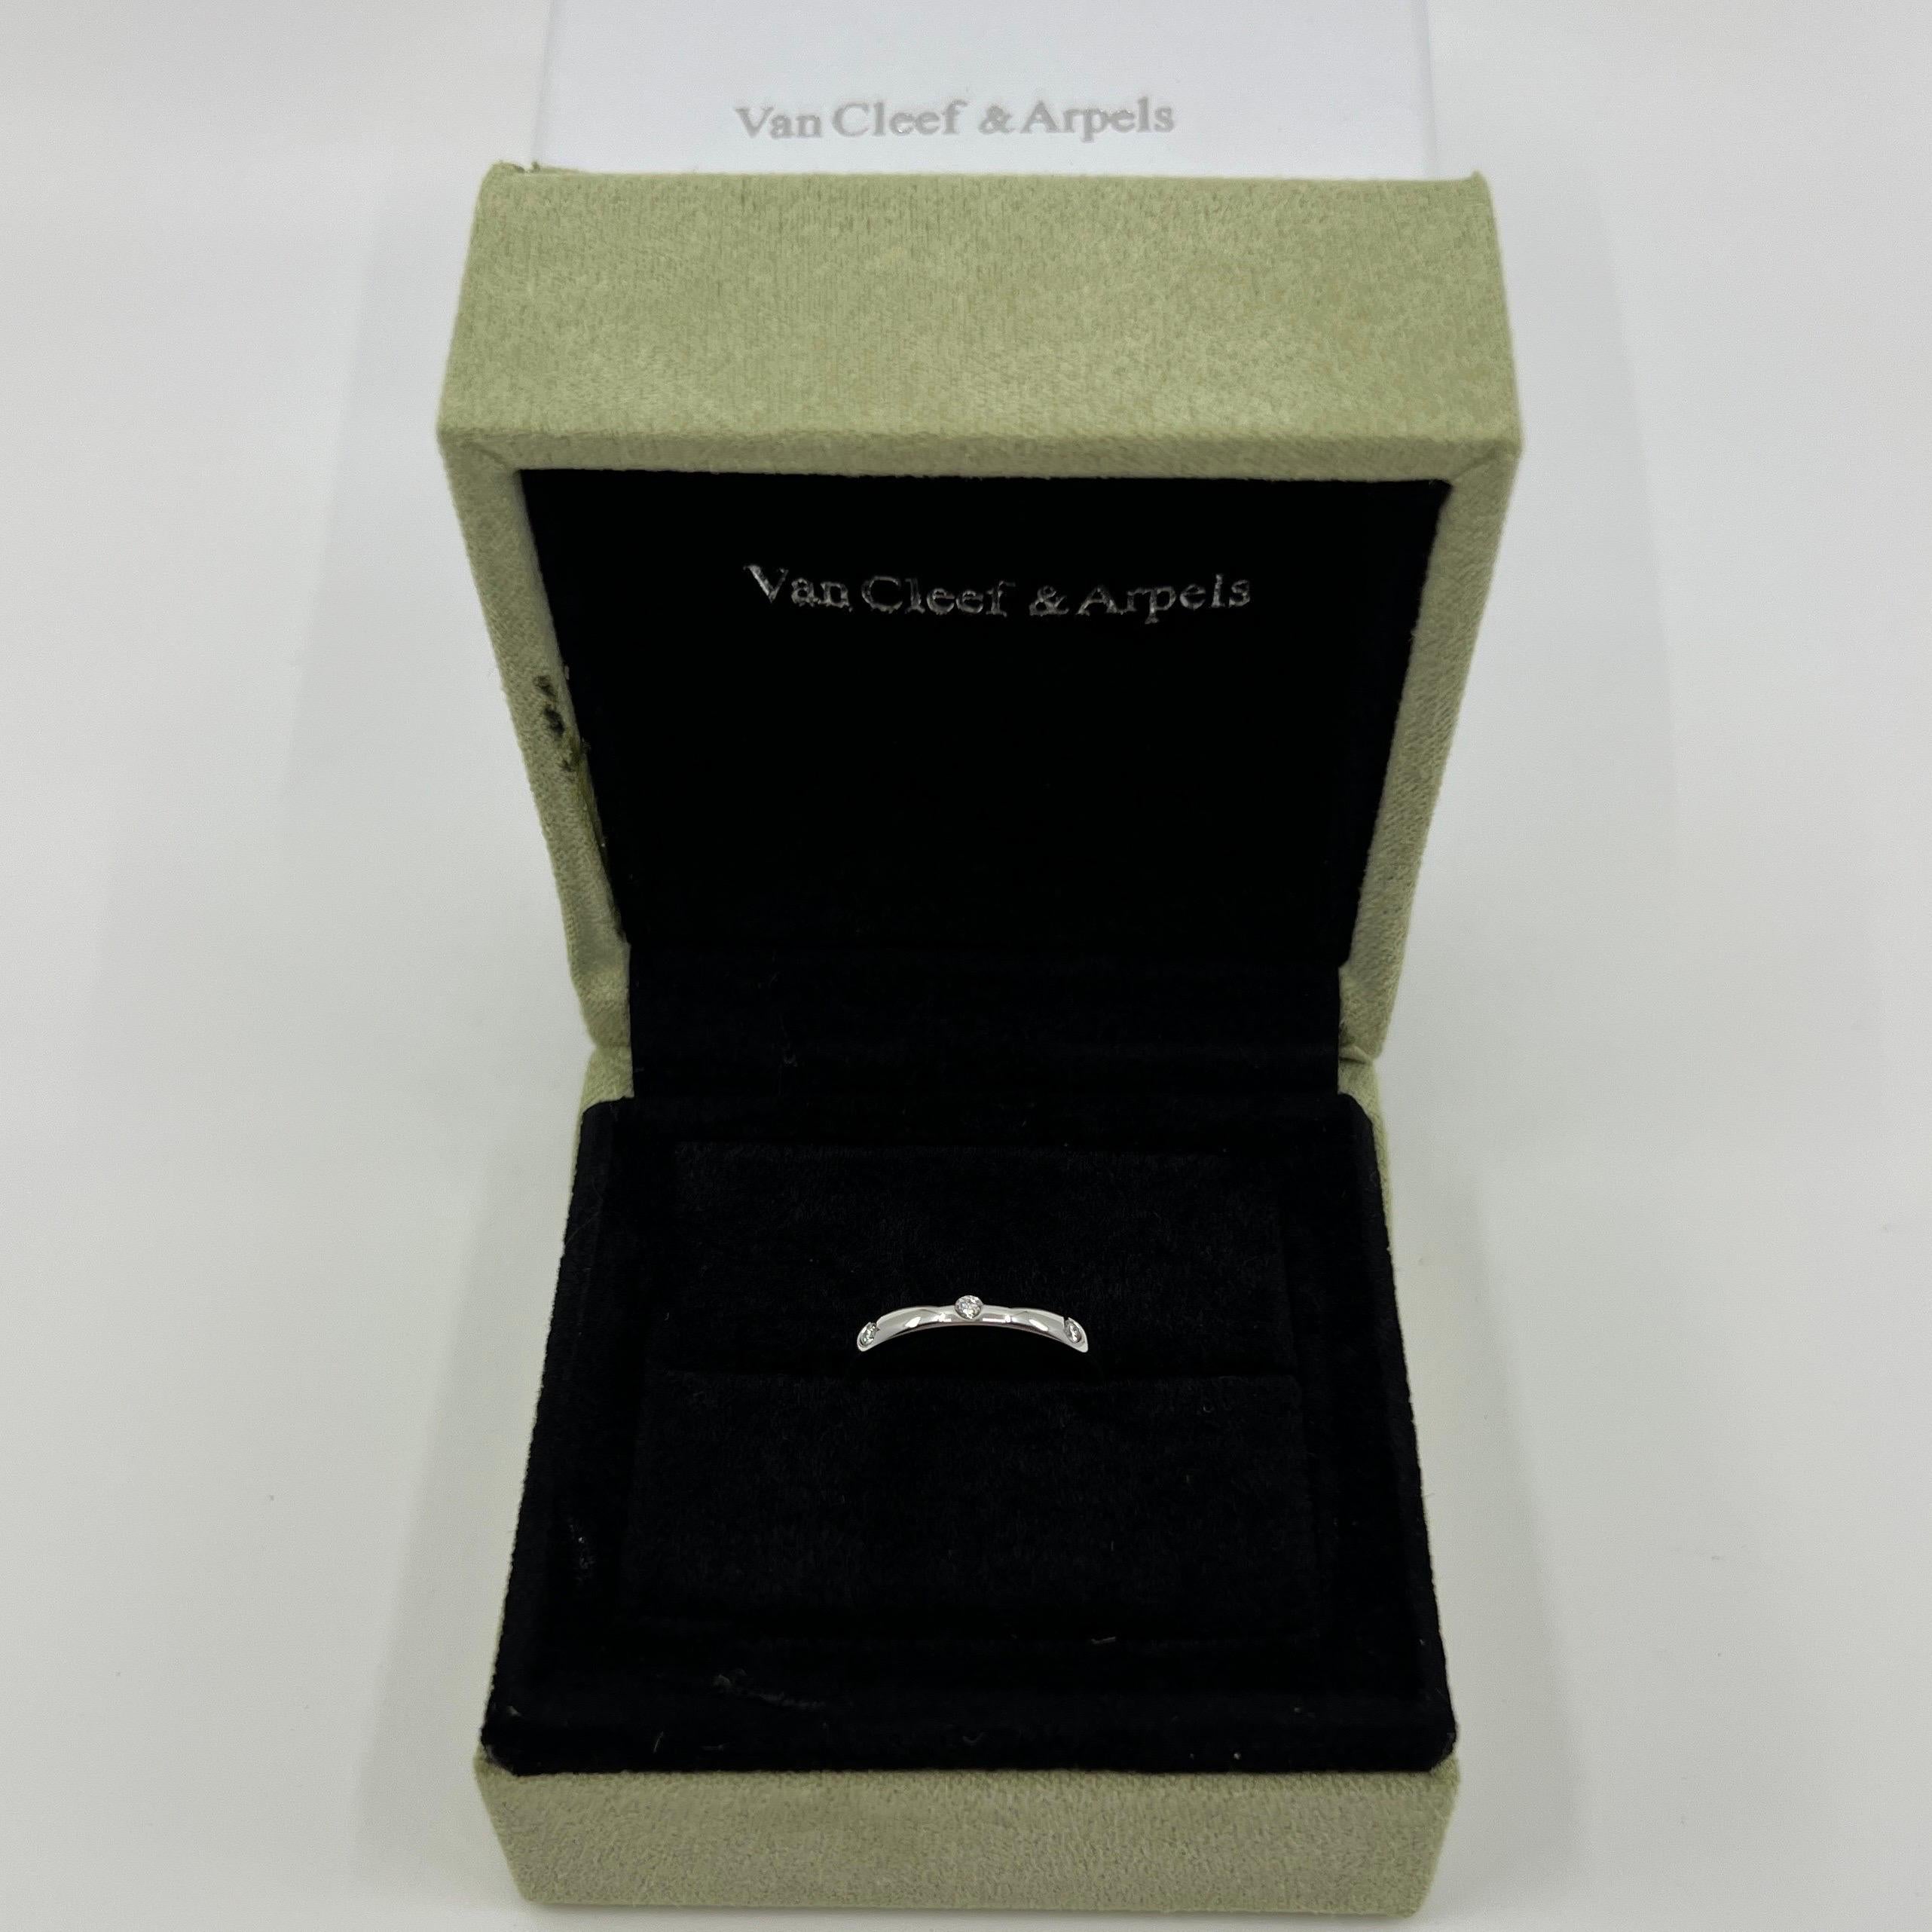 Van Cleef & Arpels Platinum Diamond Band Ring.

A classic band ring from VCA Etoile collection. Set with three flush set 1.8mm round cut natural white diamonds.
Fine jewellery houses like Van Cleef & Arpels only use the finest diamonds and gemstones